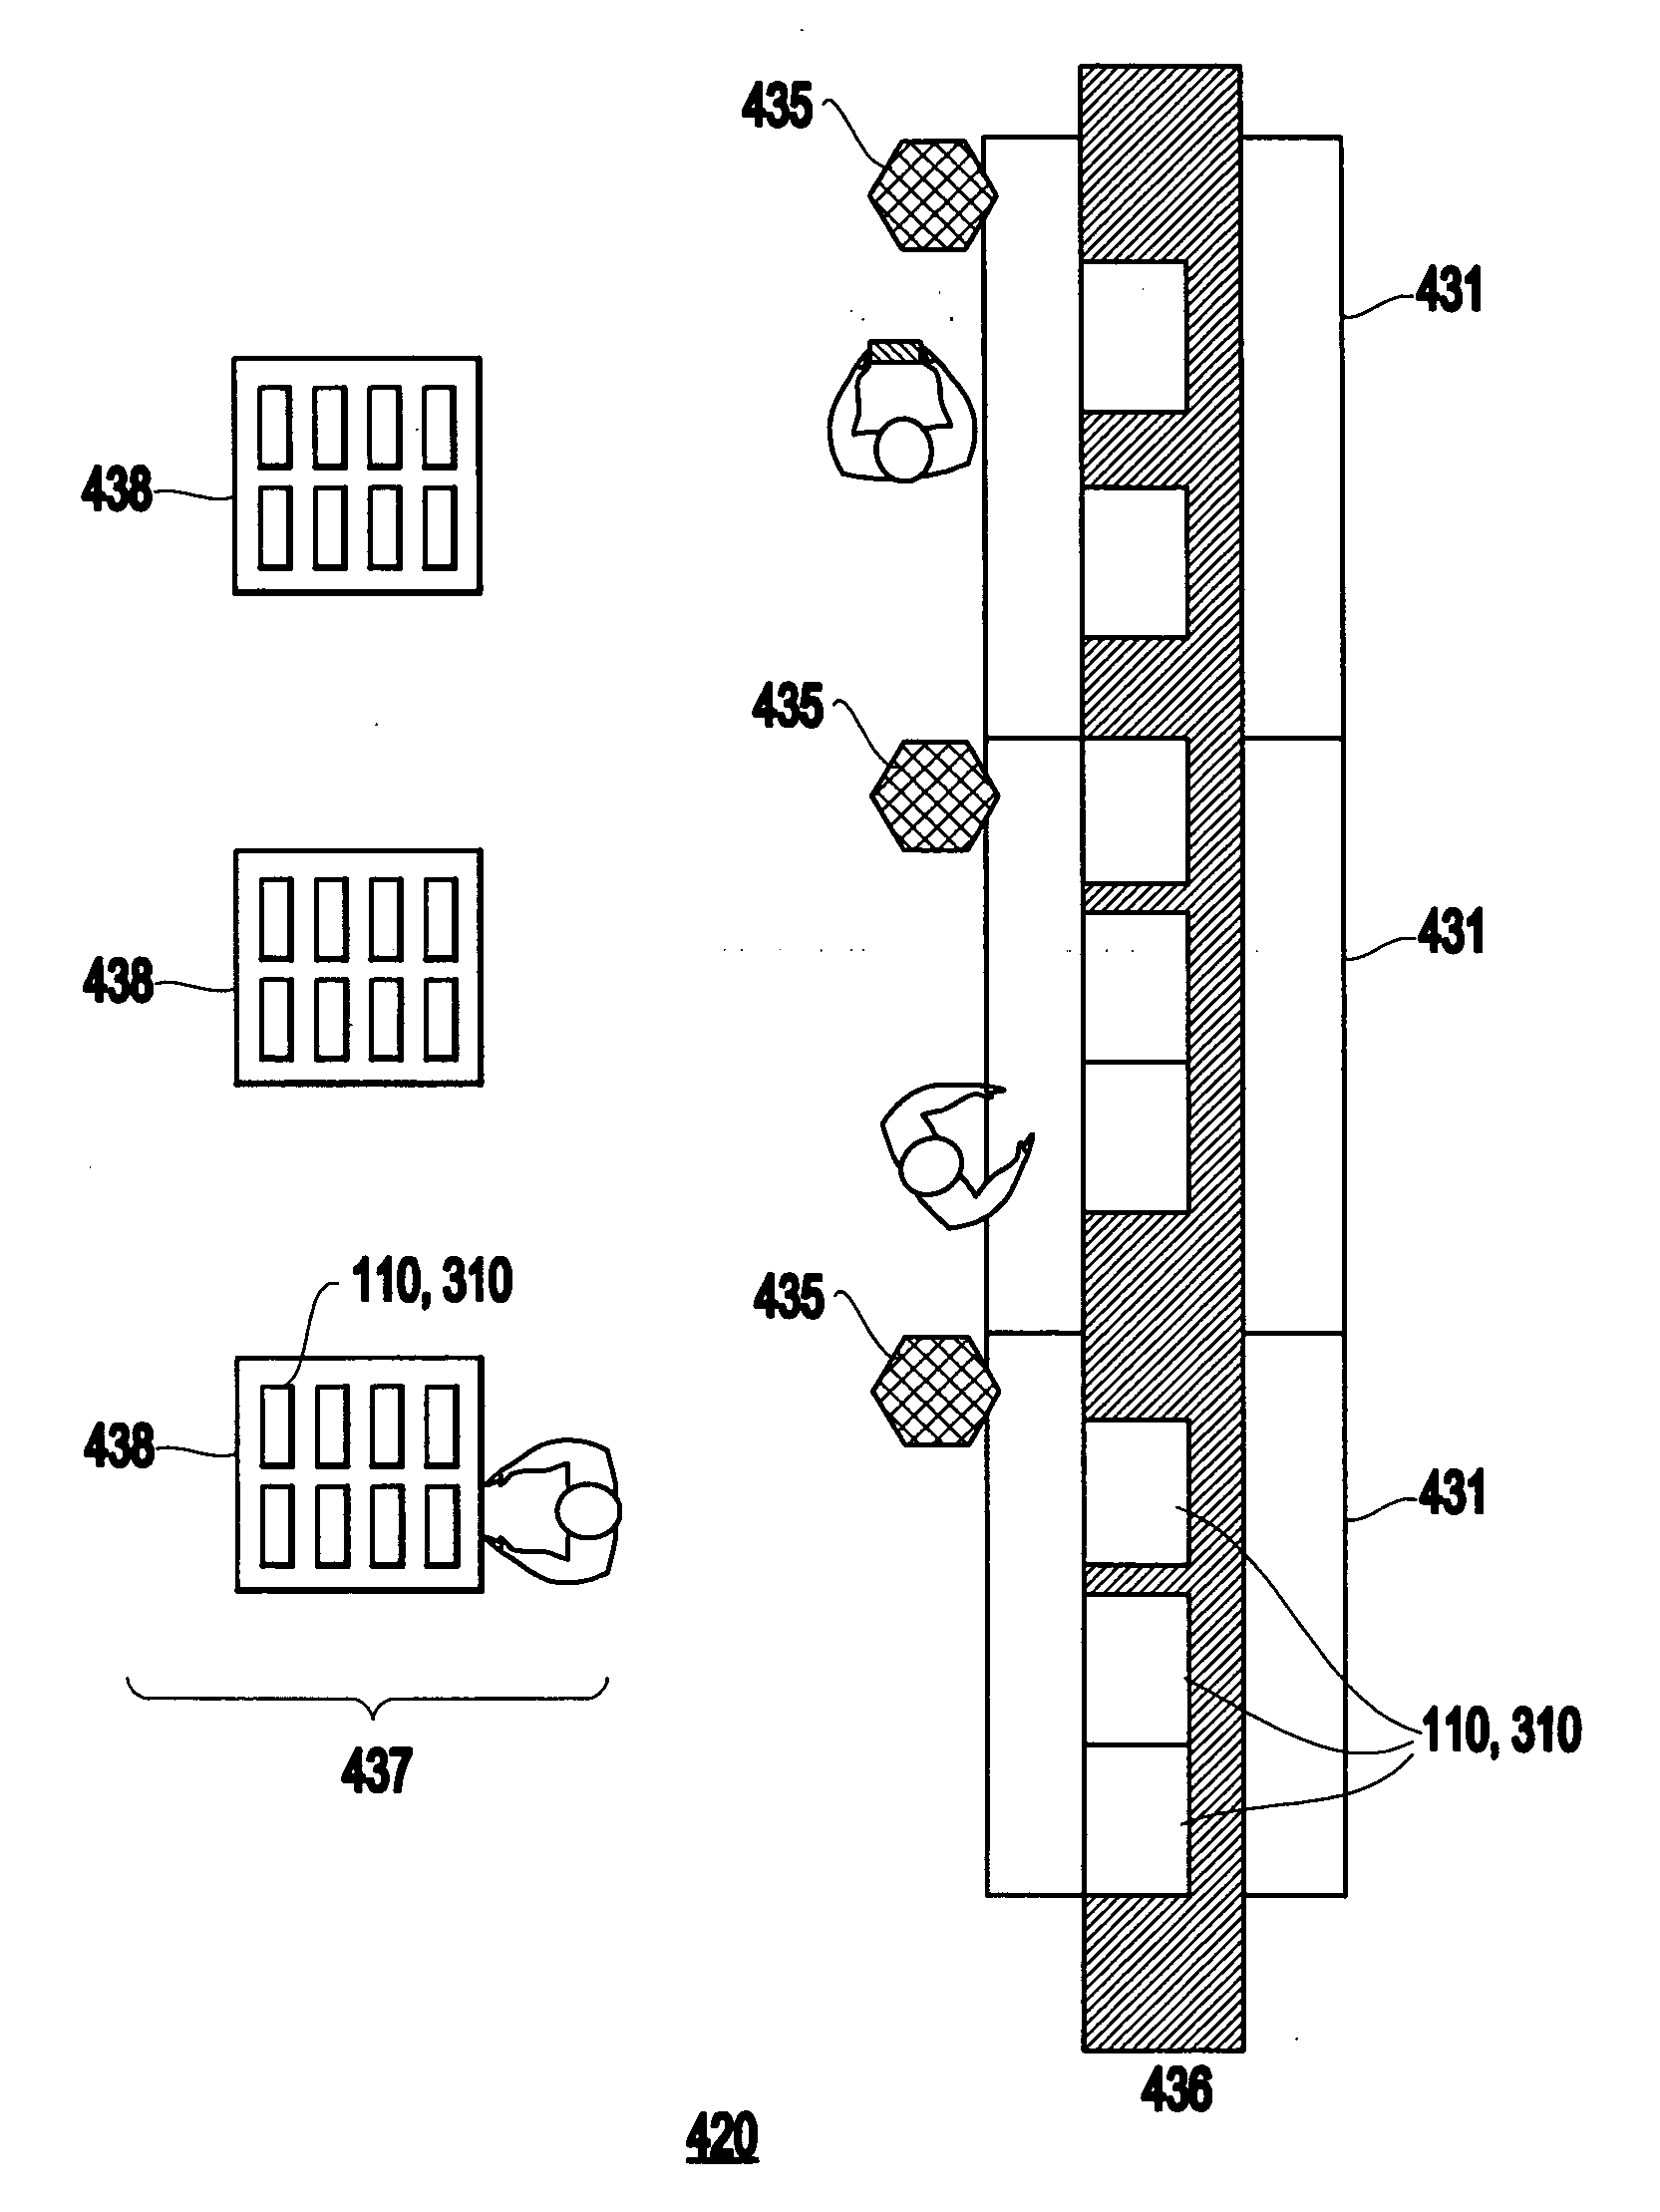 System and method for handling packages